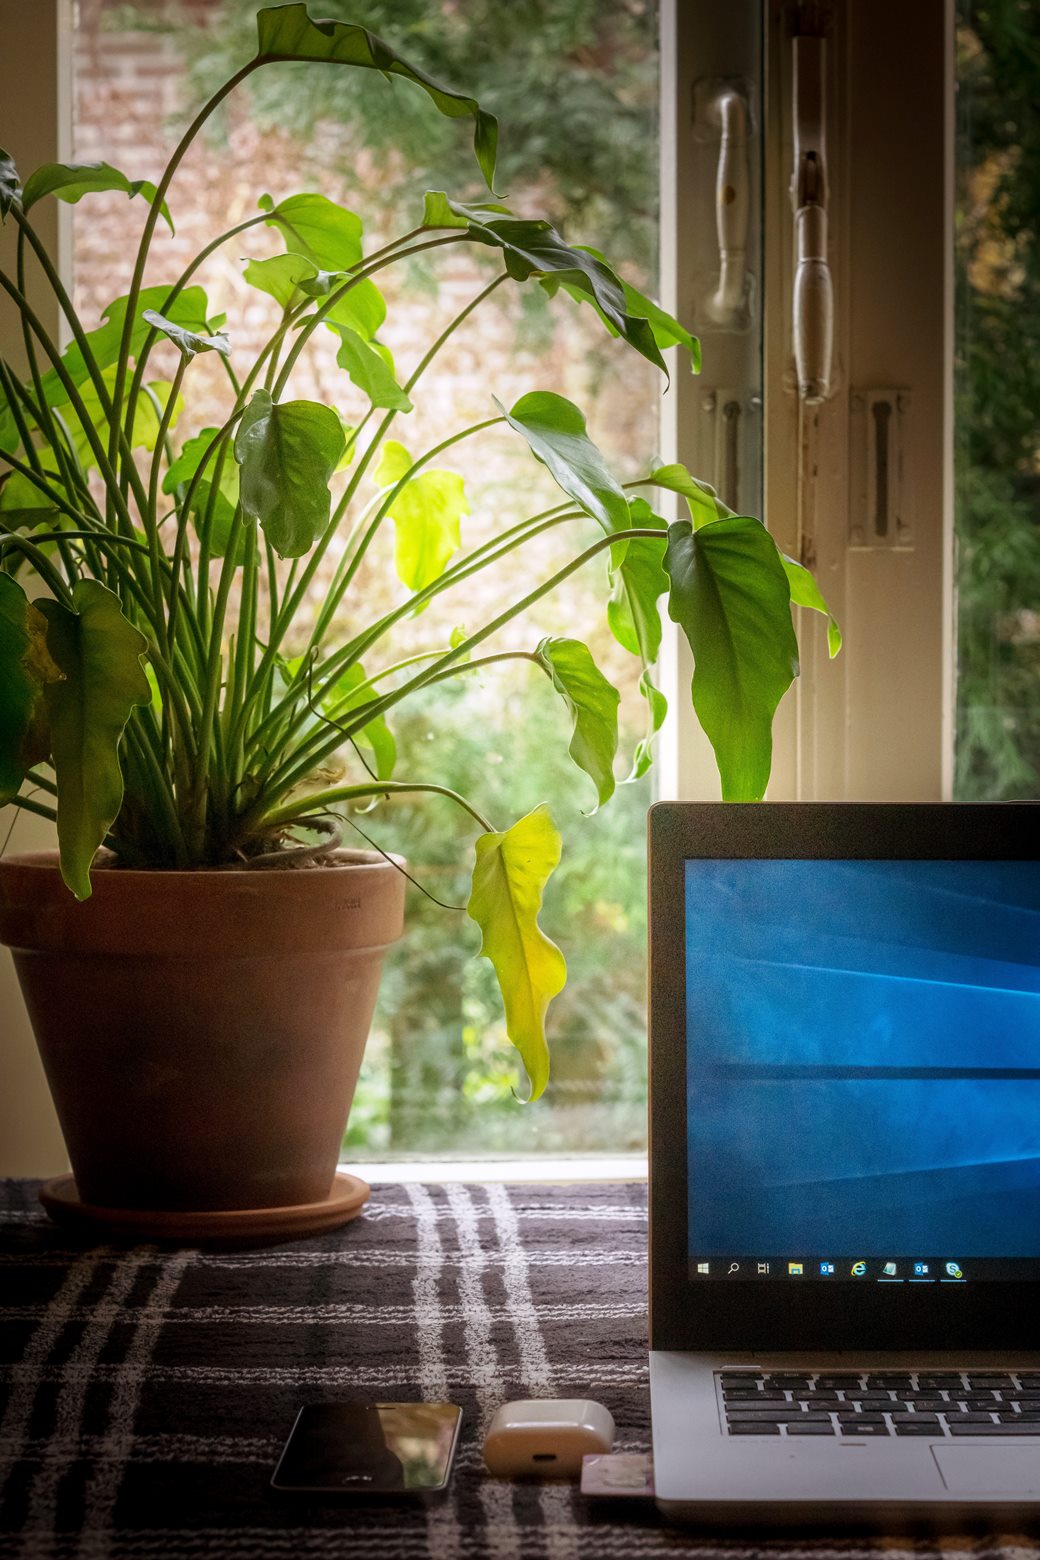 Pros of Working From Home in a Garden Office